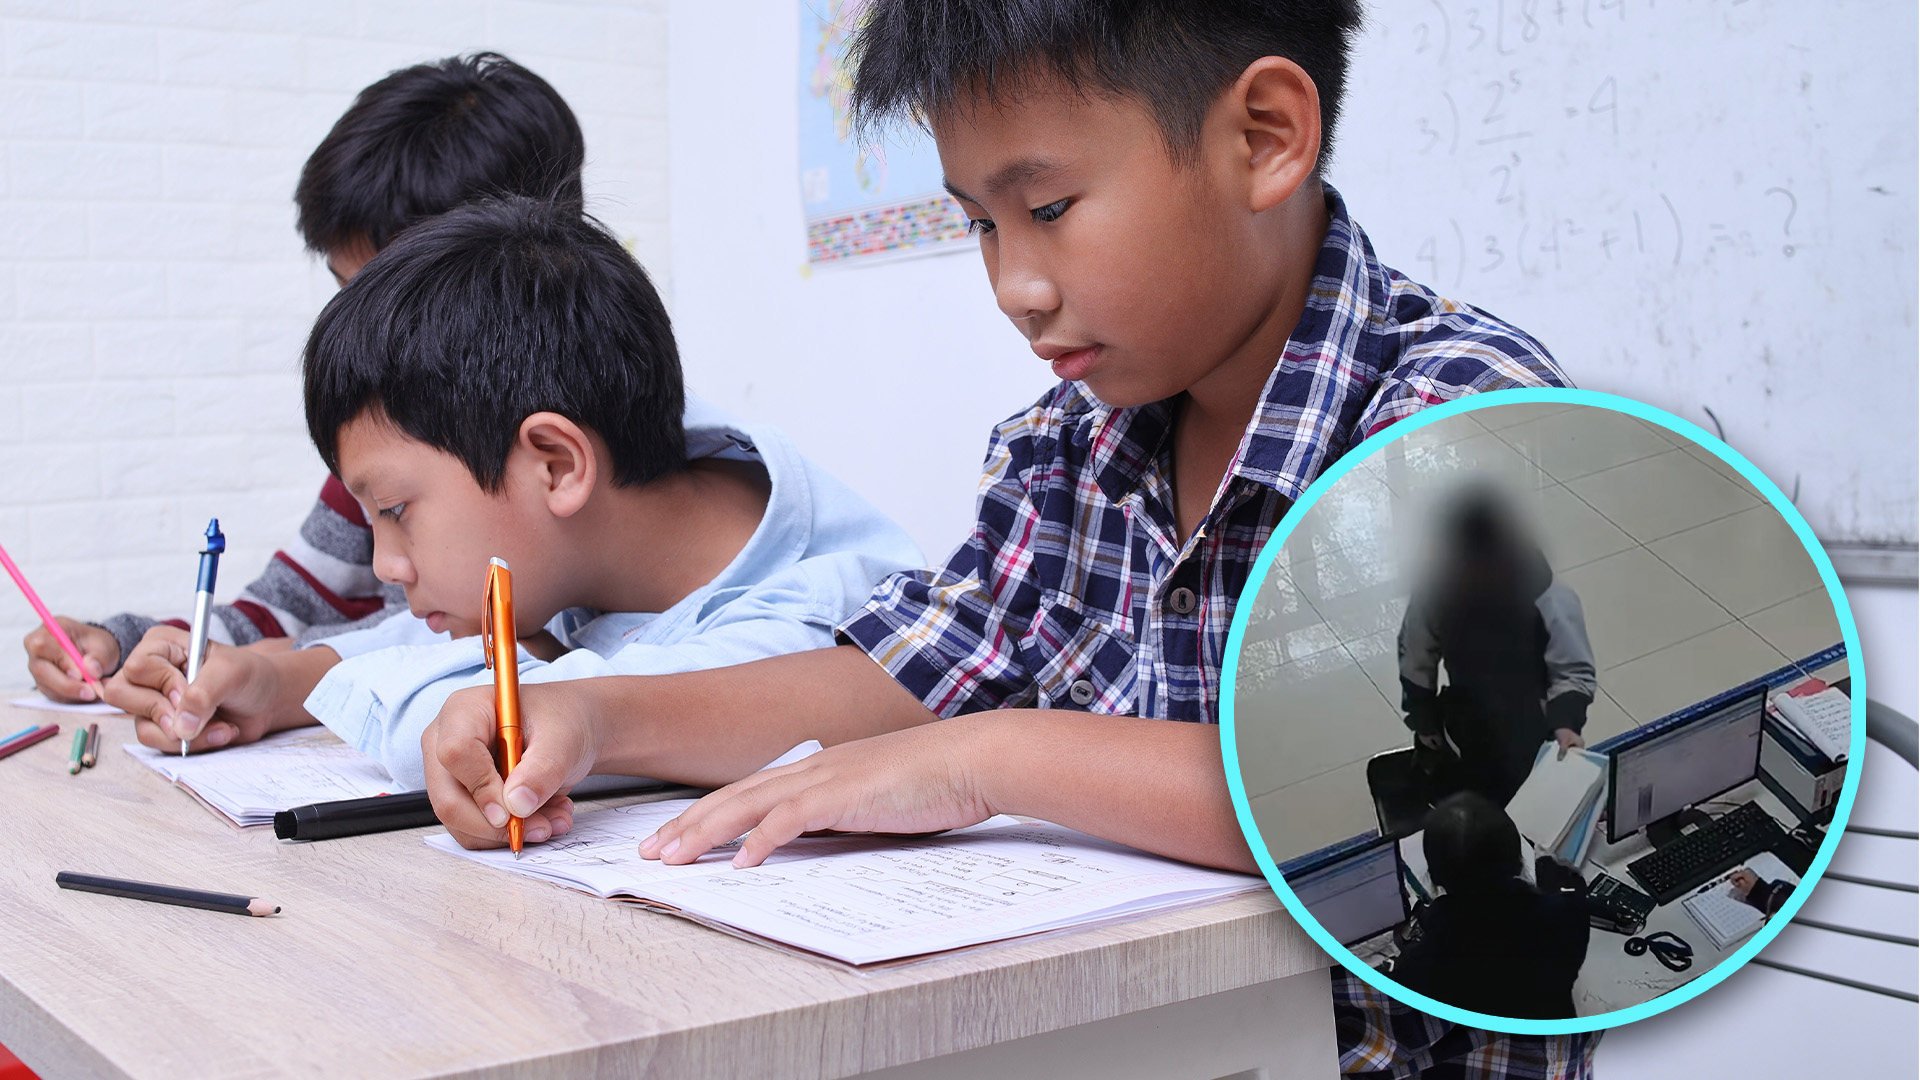 A teenage boy in China who was stressed out by the amount of studying he has to do went to the police to report an unlicensed tutor his parents made him attend, sparking a heated debate on social media about the academic pressure mainland children face. Photo: SCMP composite/Shutterstock/Douyin